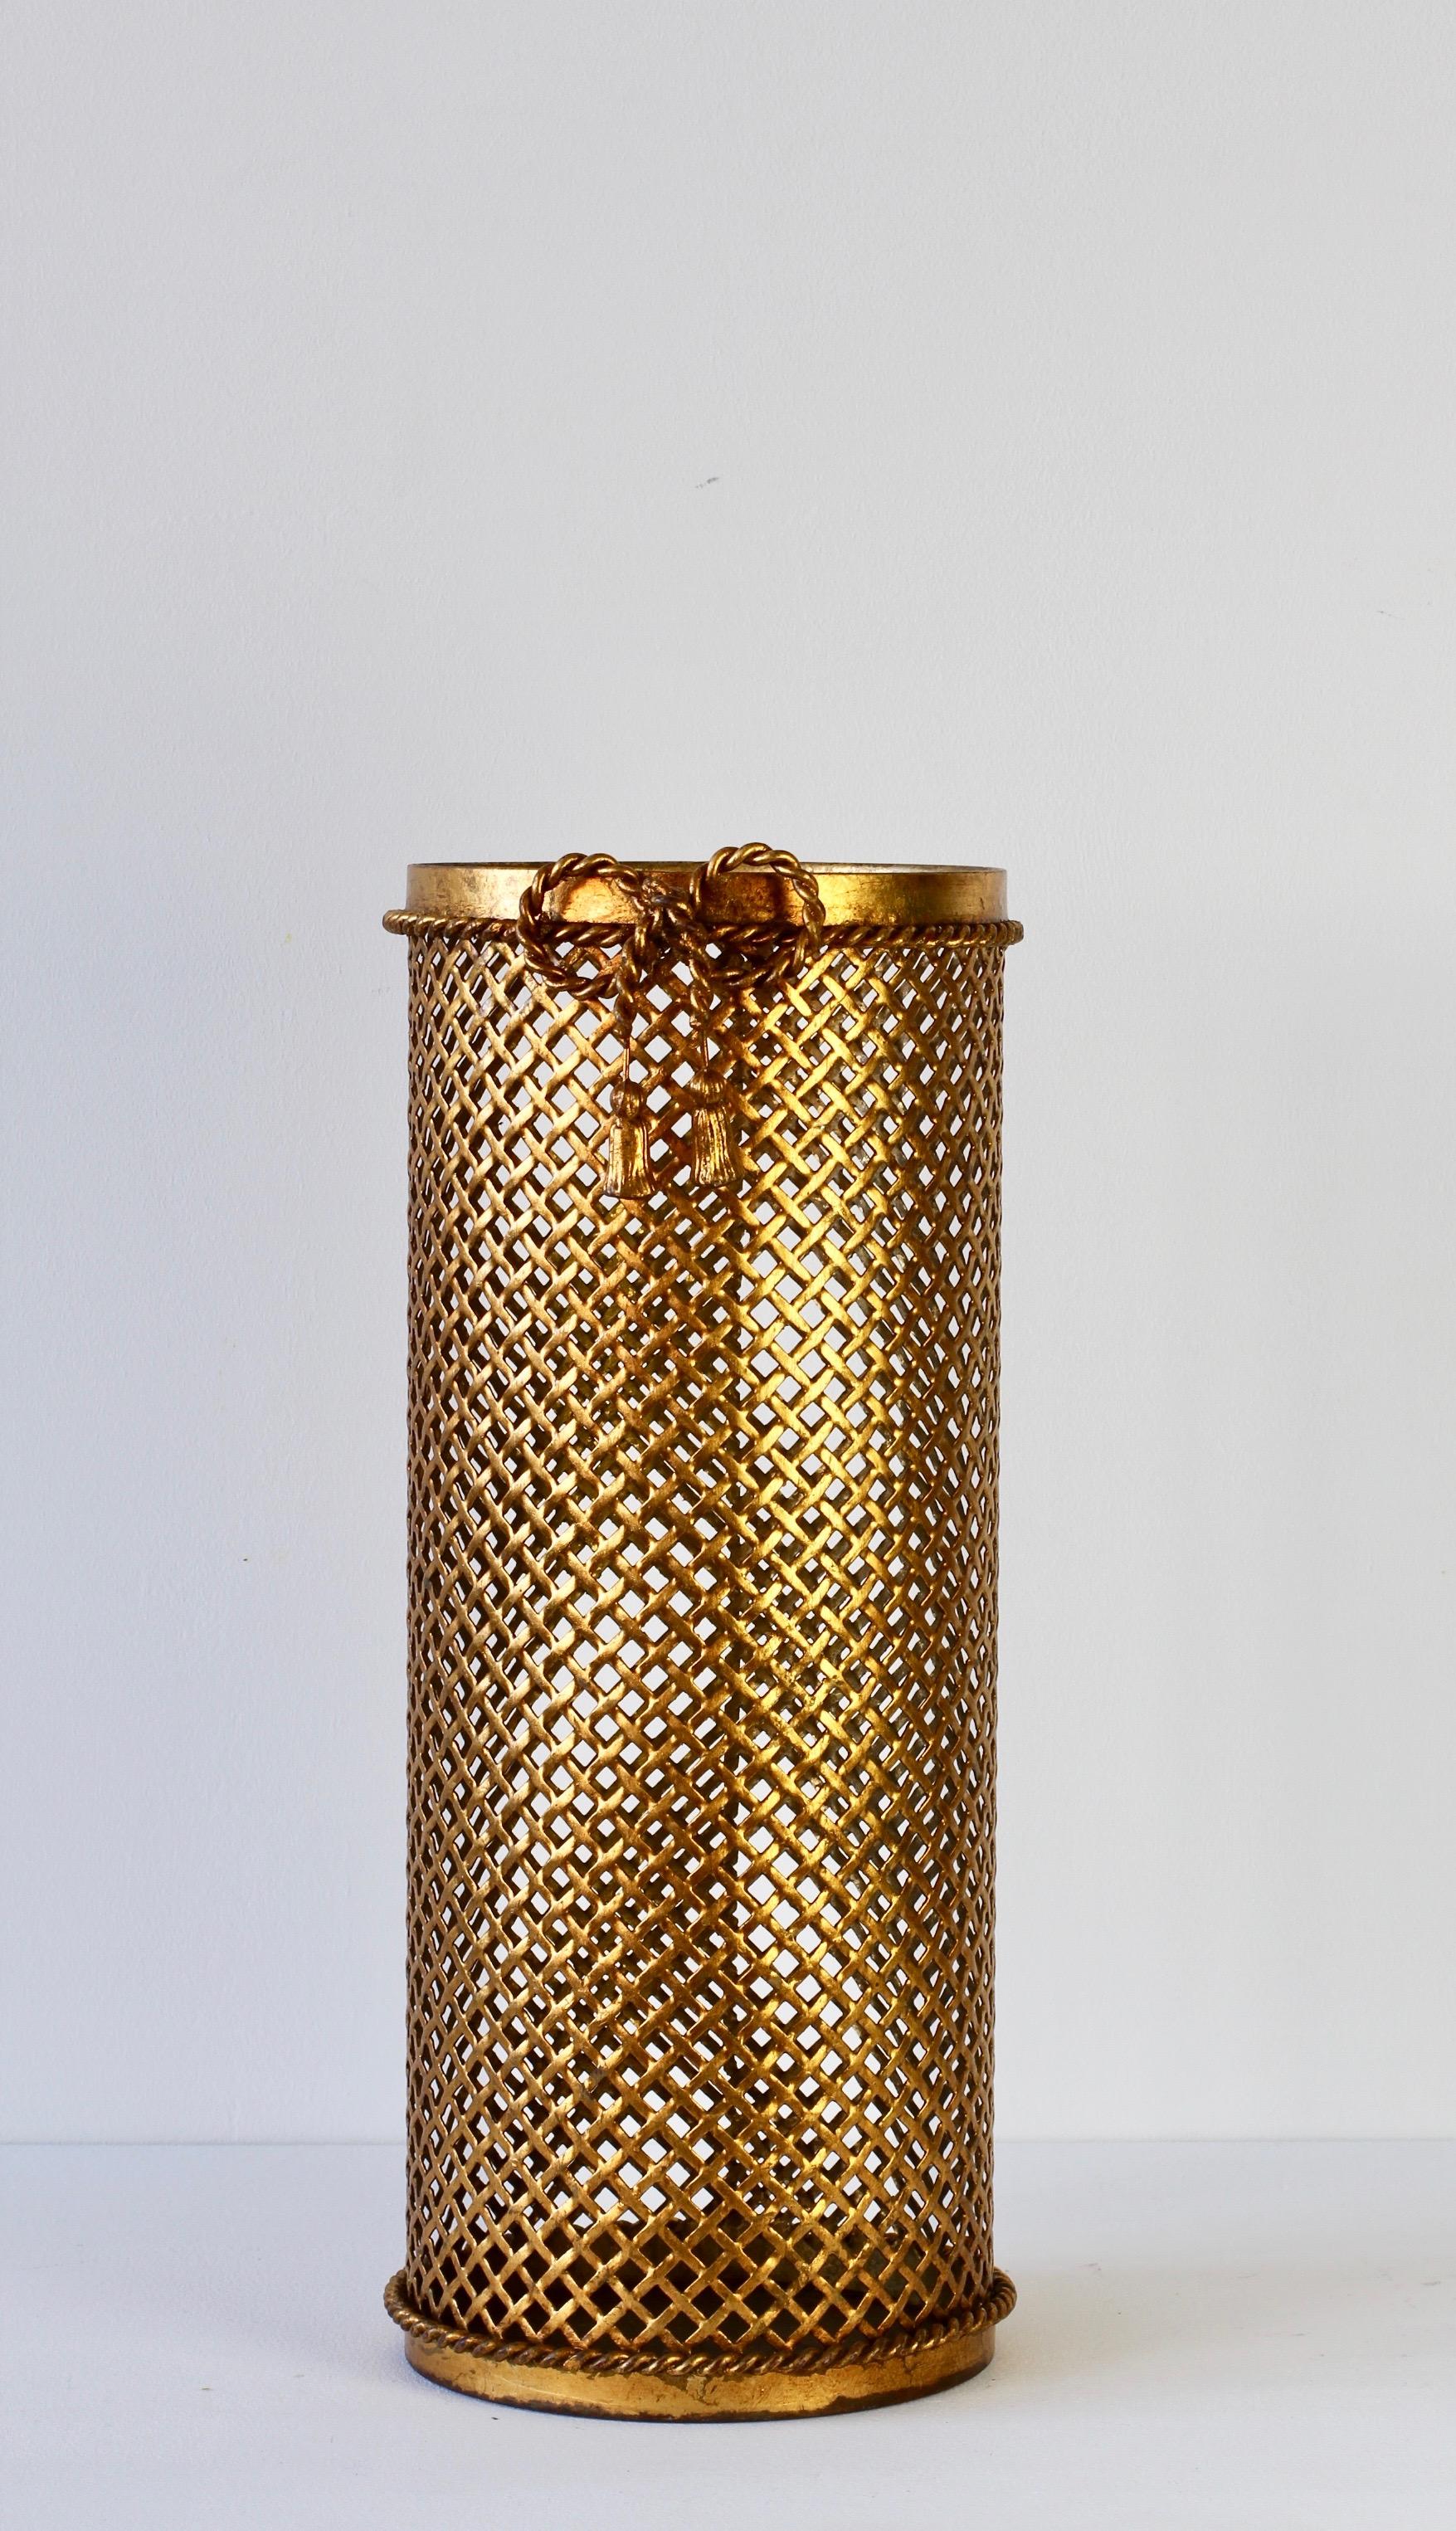 Stunning midcentury gold/gilt/gilded Hollywood Regency style umbrella stand or holder made in Italy, circa 1950. The perforated lattice patterned metalwork with elegant, thin bent rope and tassel details finish the piece perfectly.

This is a